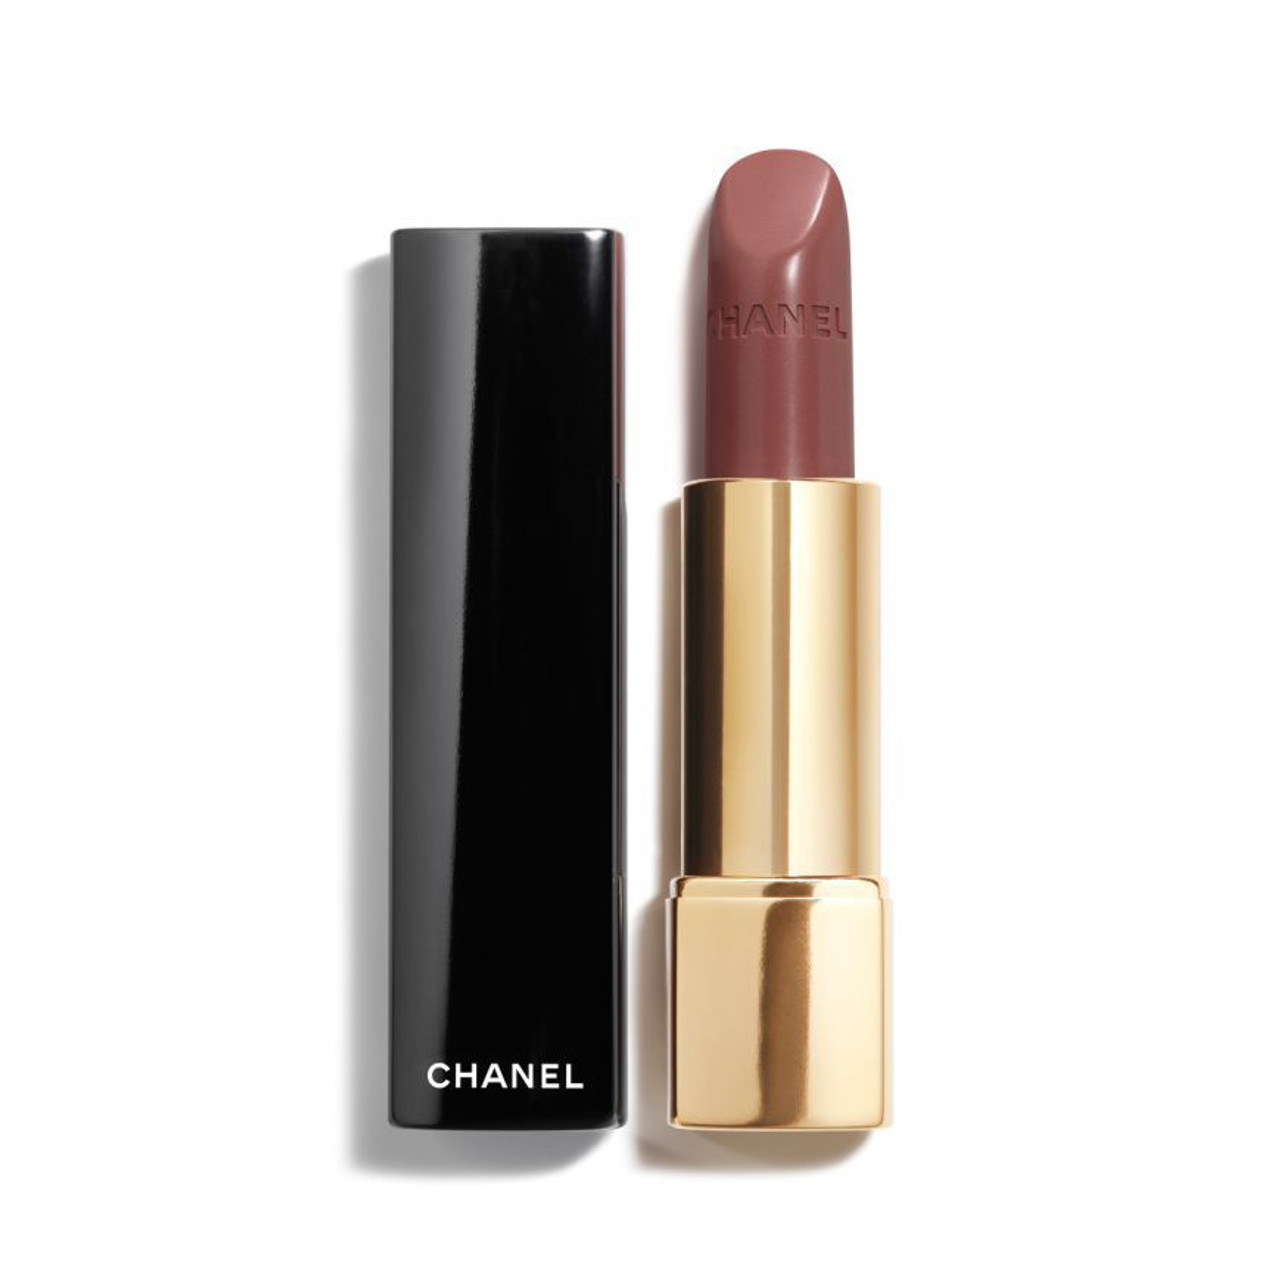 CHANEL ROUGE ALLURE #196 #199 #206 #209 #fy #fyp #chanel #chanellipst